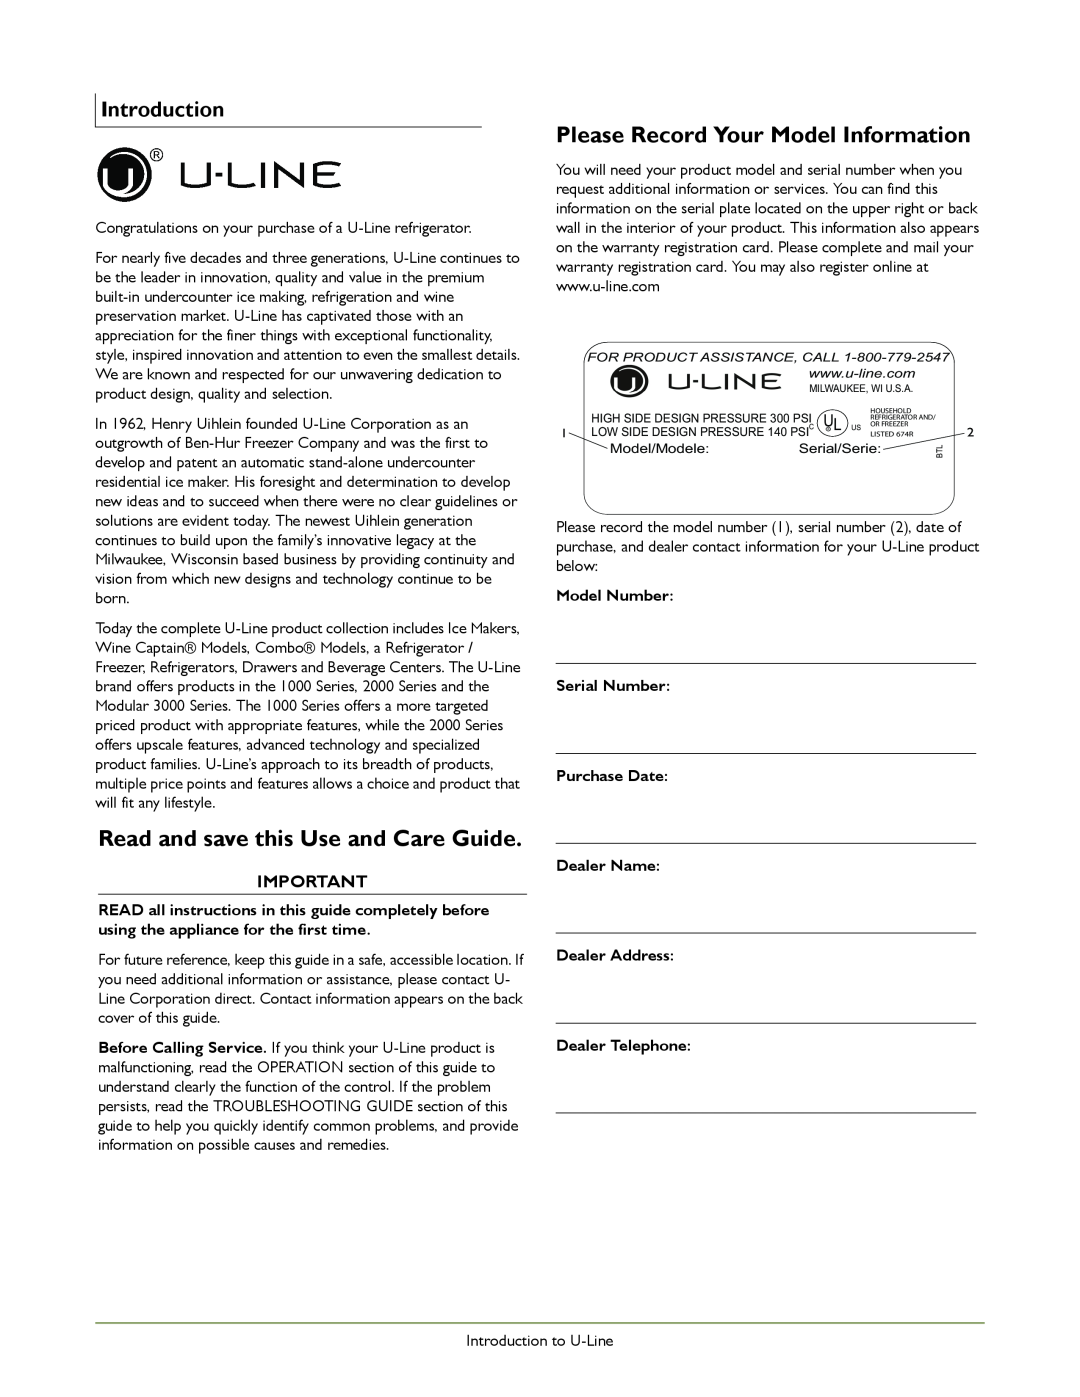 U-Line U-2175WCCOL-60 manual Read and save this Use and Care Guide, Please Record Your Model Information, Introduction 